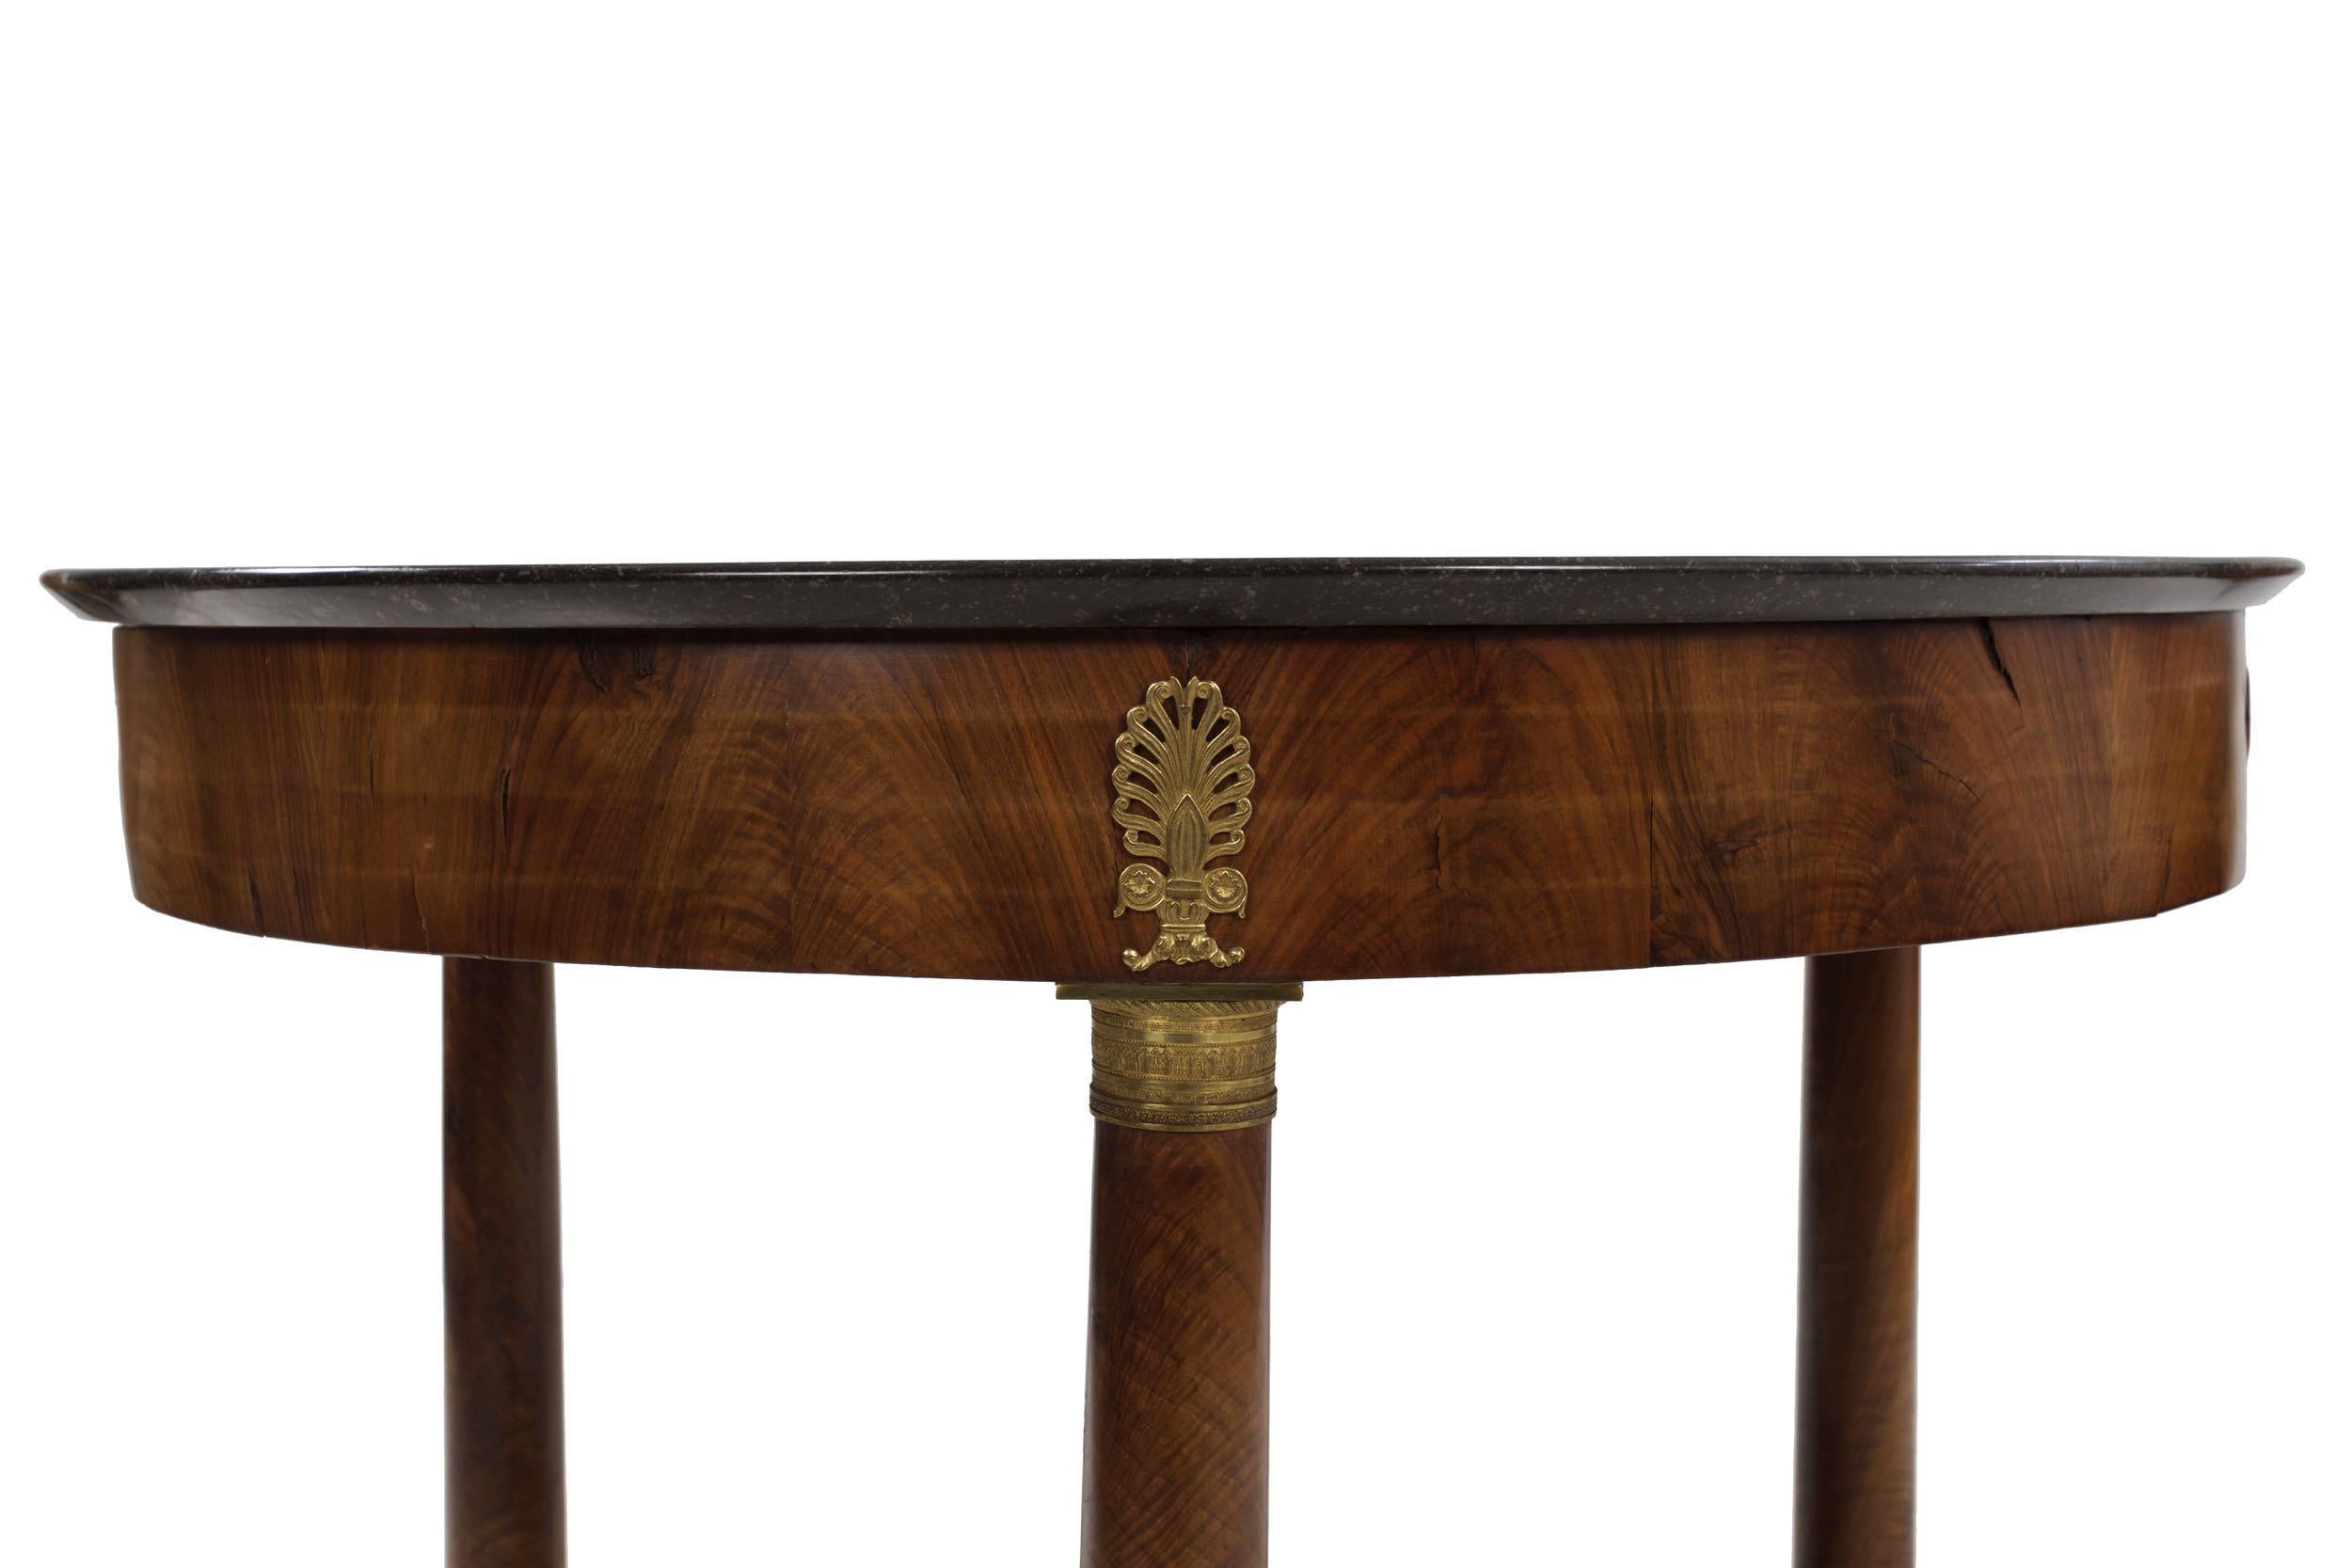 French Empire Antique Burl Walnut Center Table with Black Marble Top, circa 1815 For Sale 3